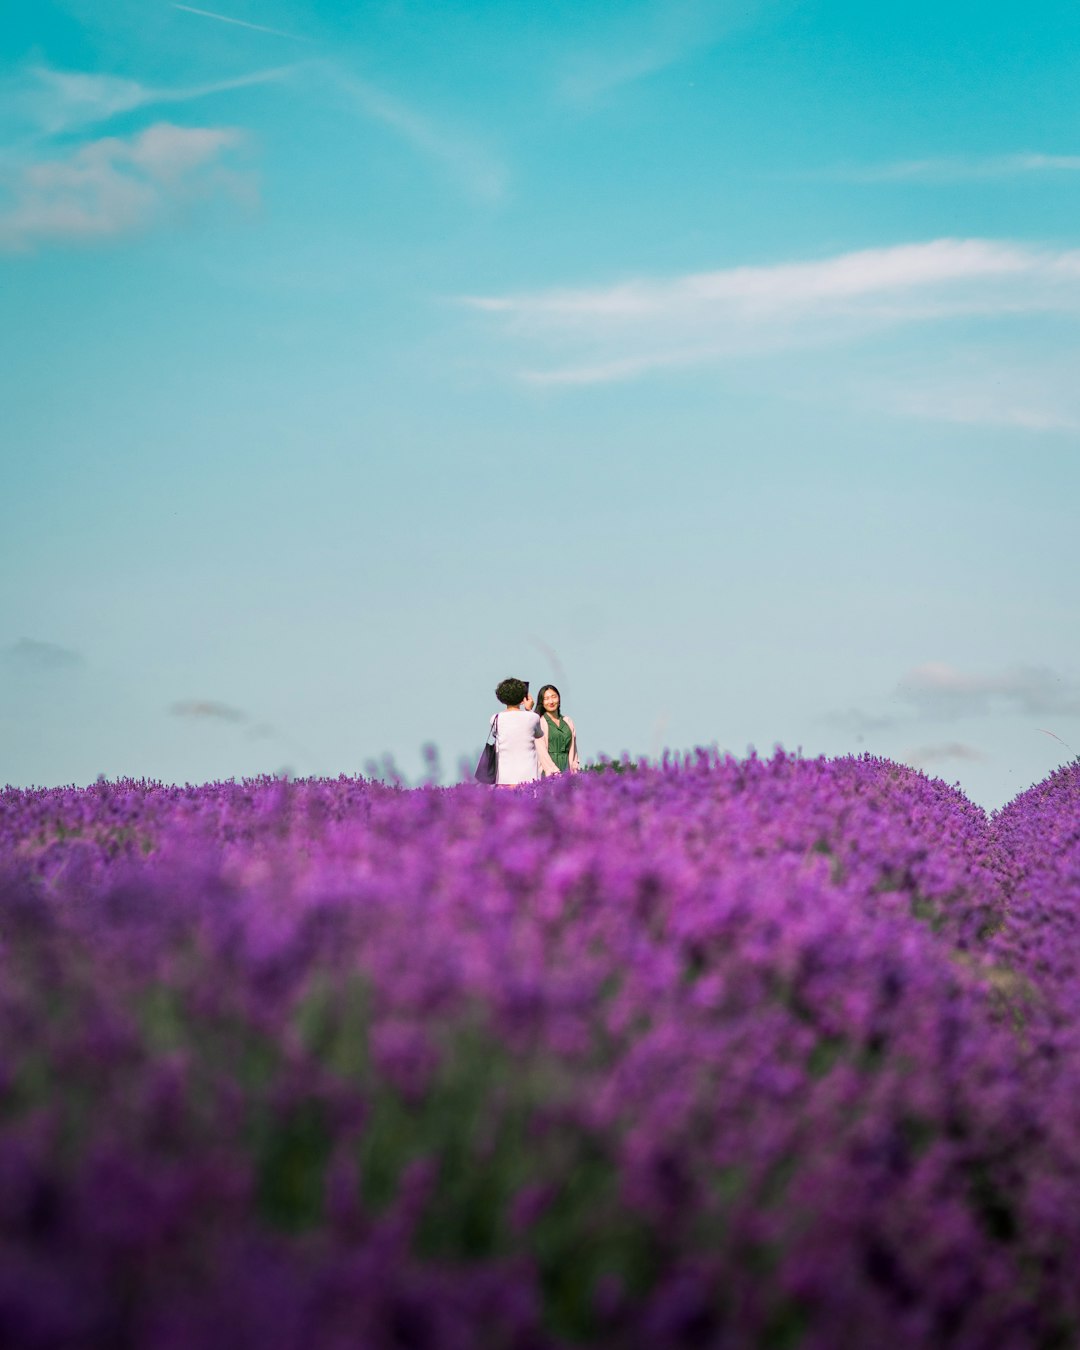 three people standing on purple flower field under blue and white skies